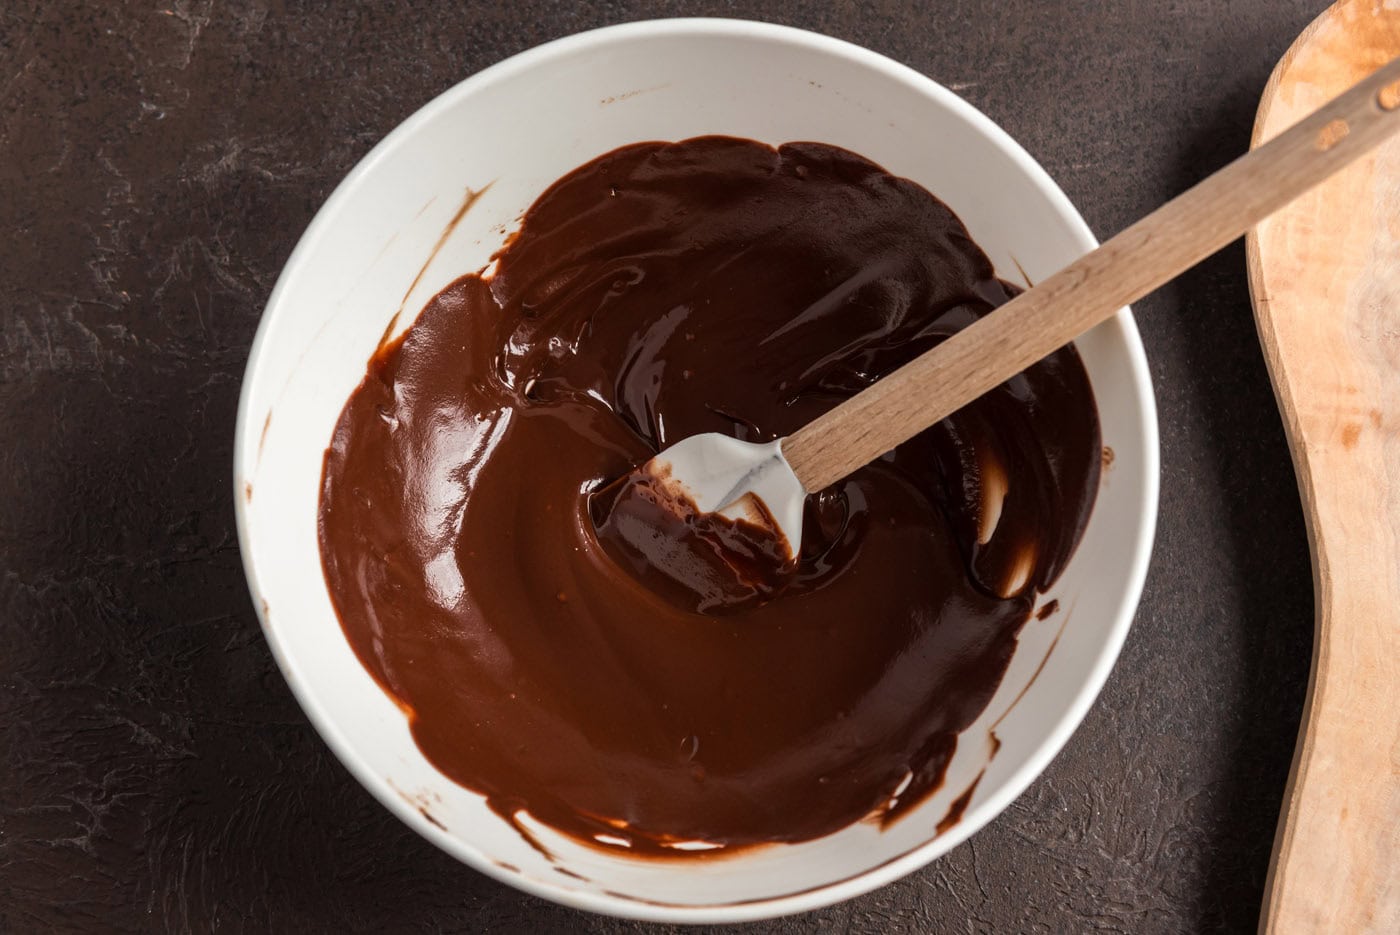 melted chocolate in a bowl with a rubber spatula